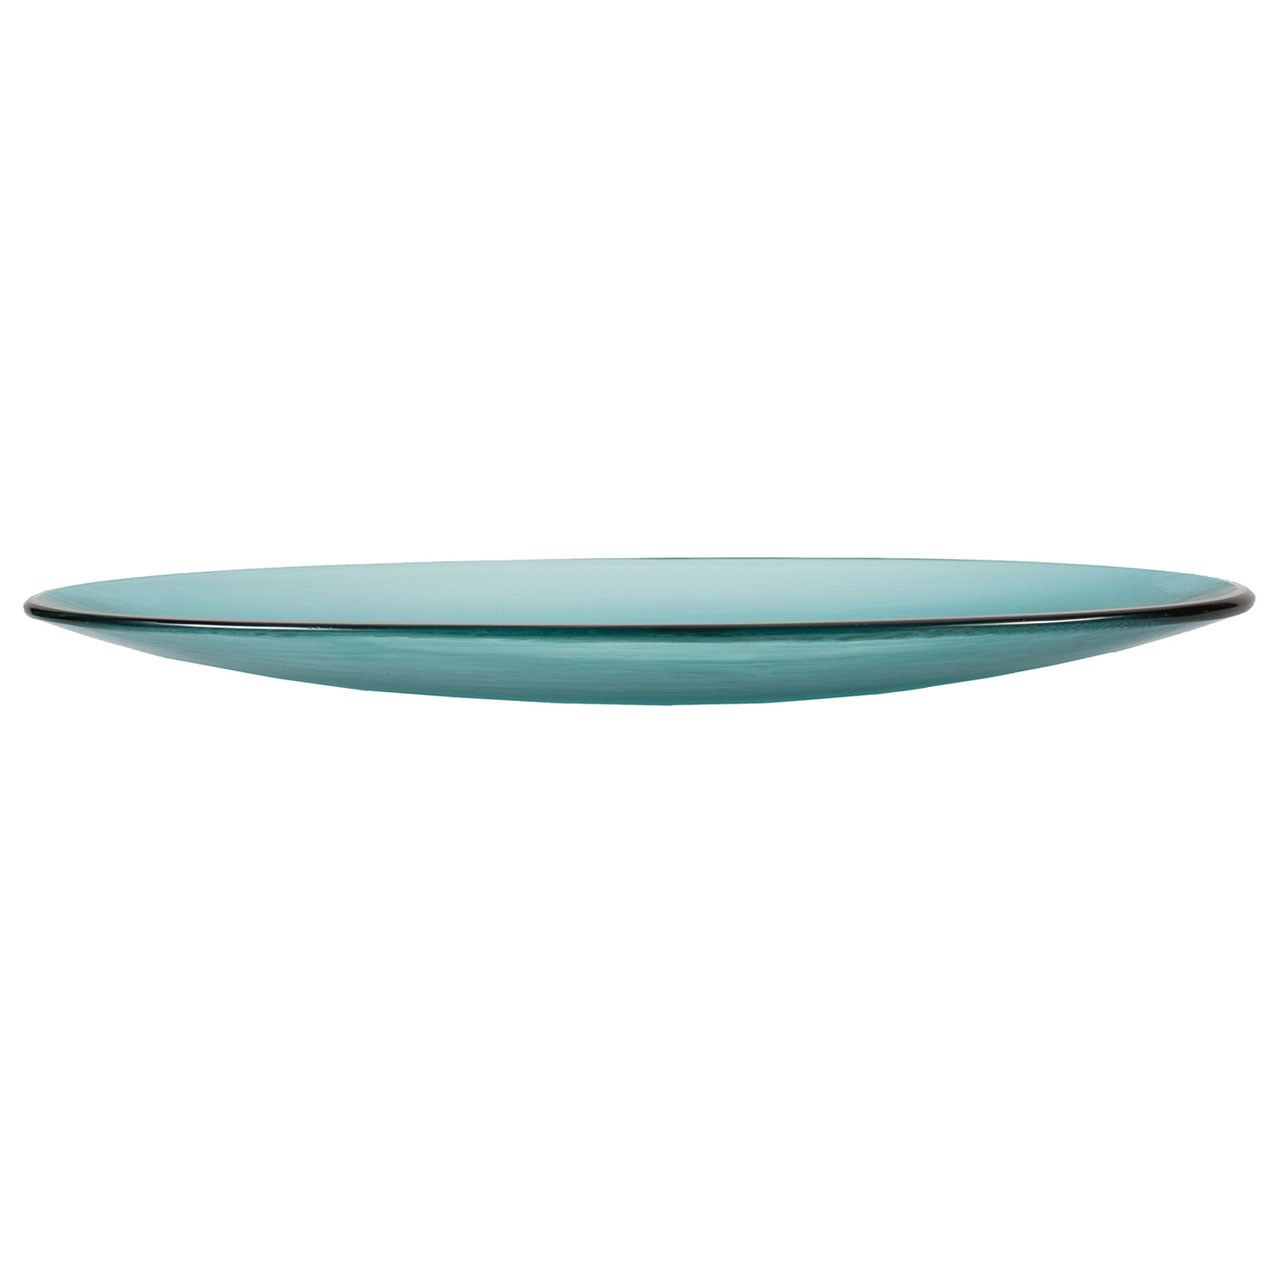 Long Leaf Shaped Inciso Bowl by Paolo Venini